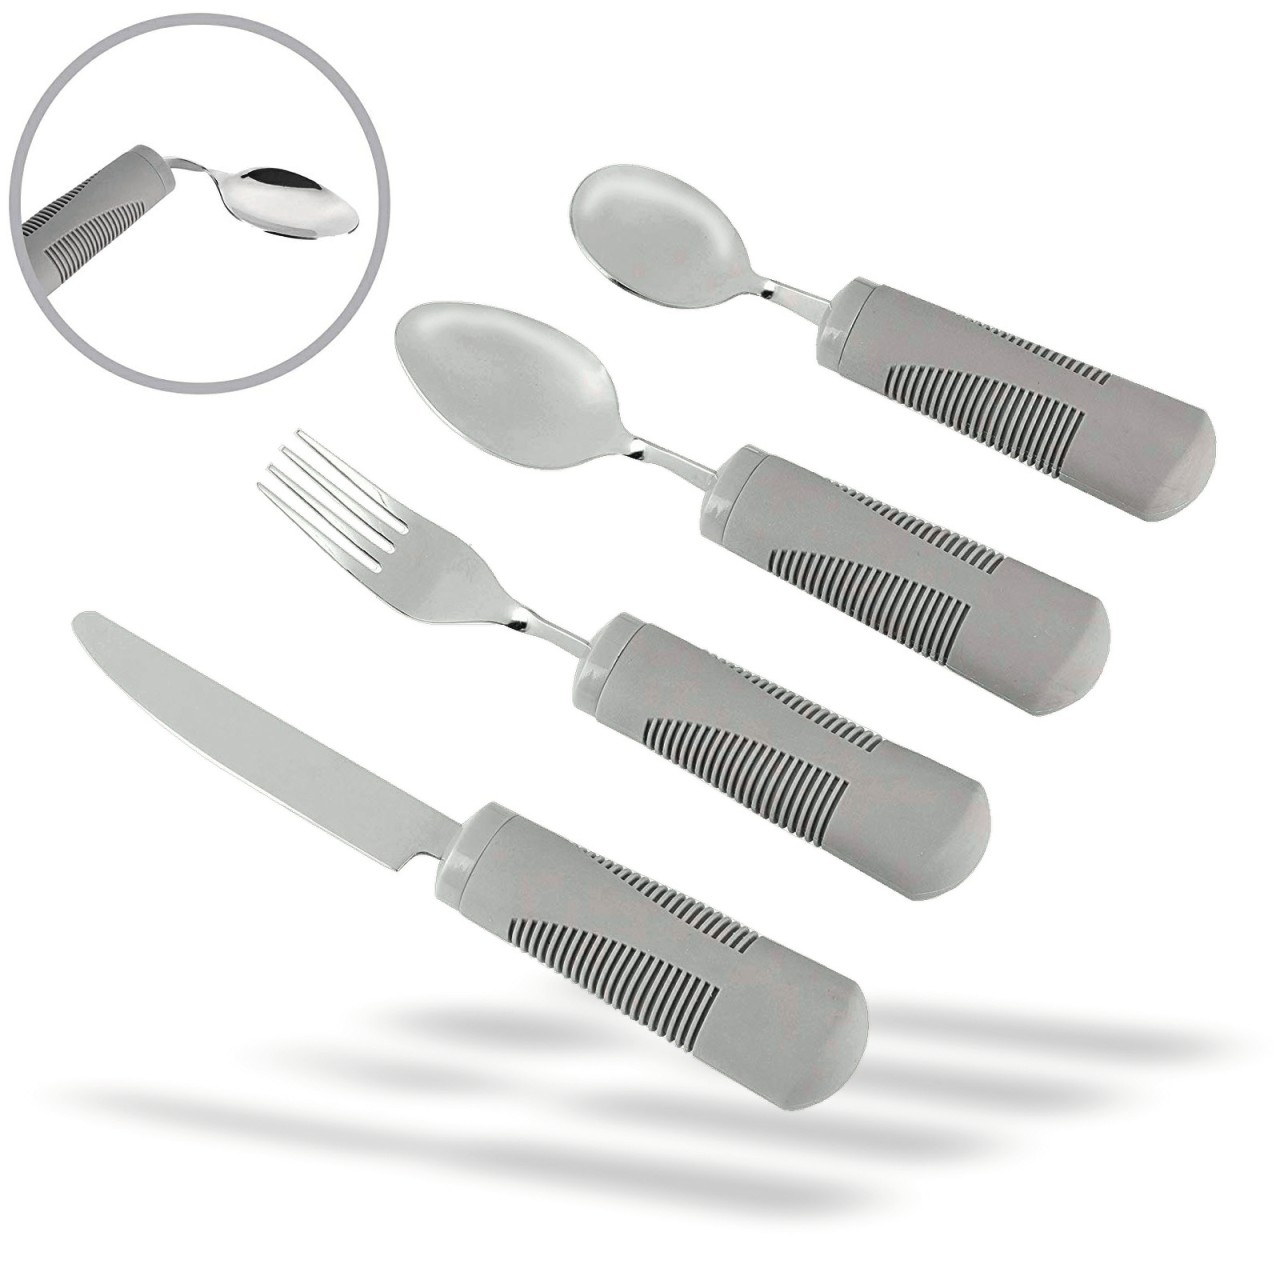 Weighted Bendable 4 Piece Cutlery Set